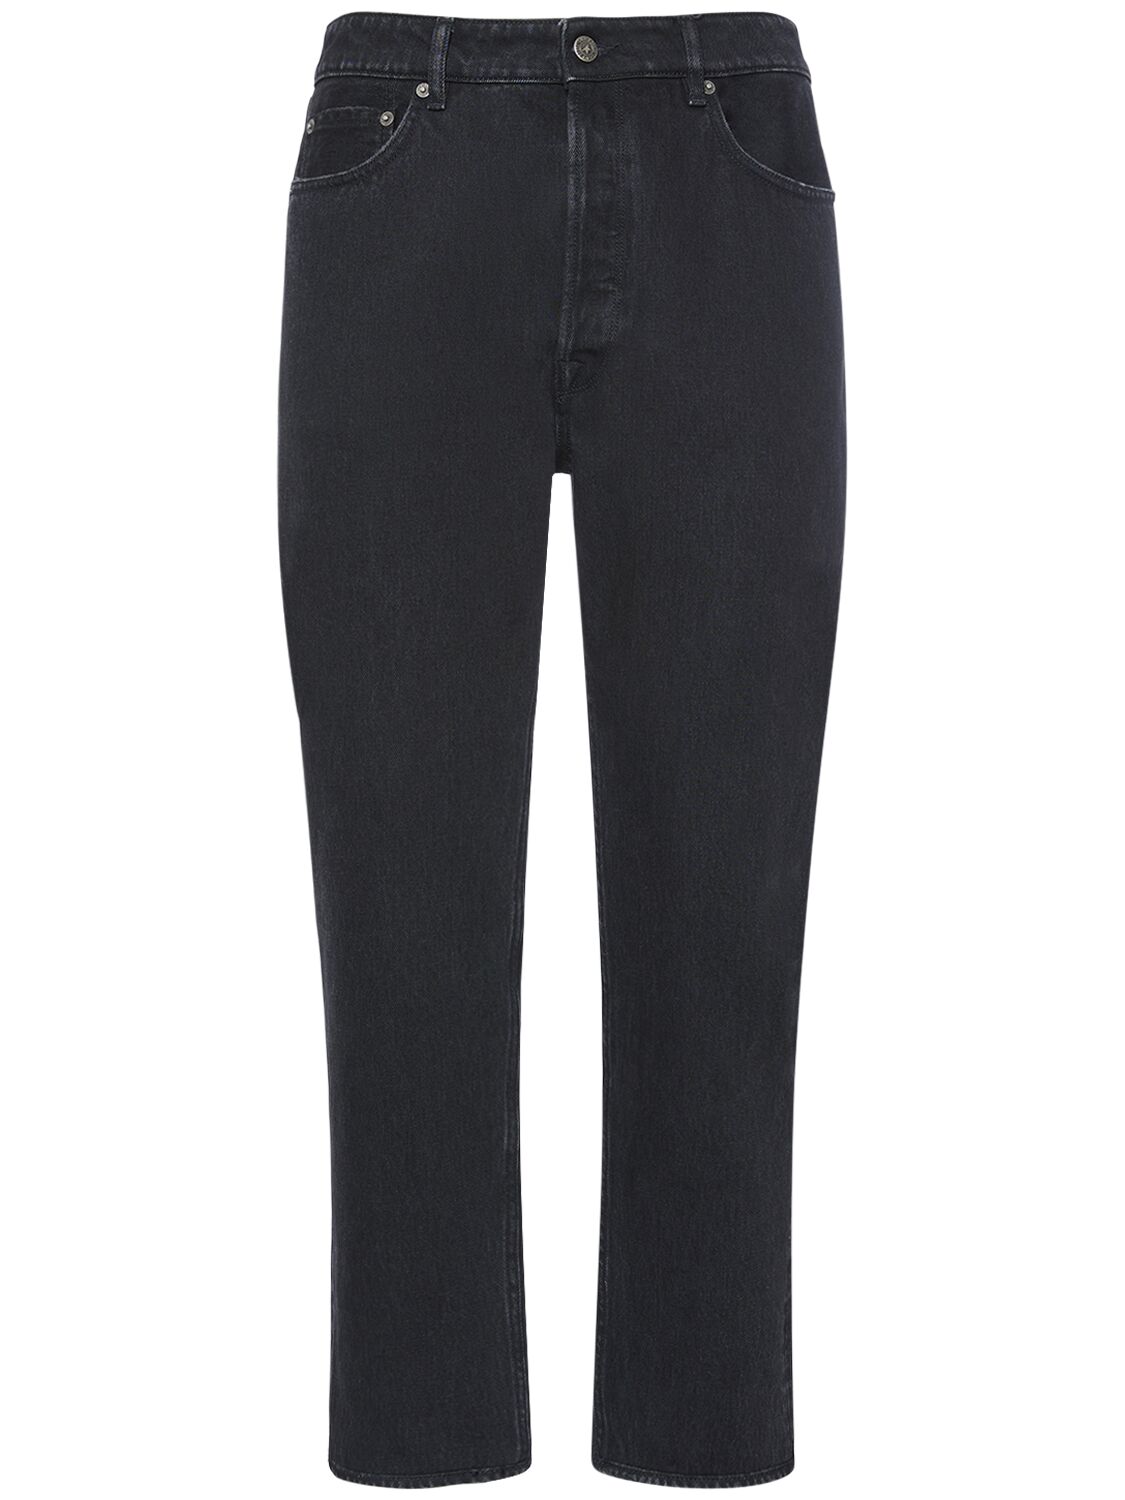 Golden Goose Happy One Washed Cotton Denim Jeans In Black